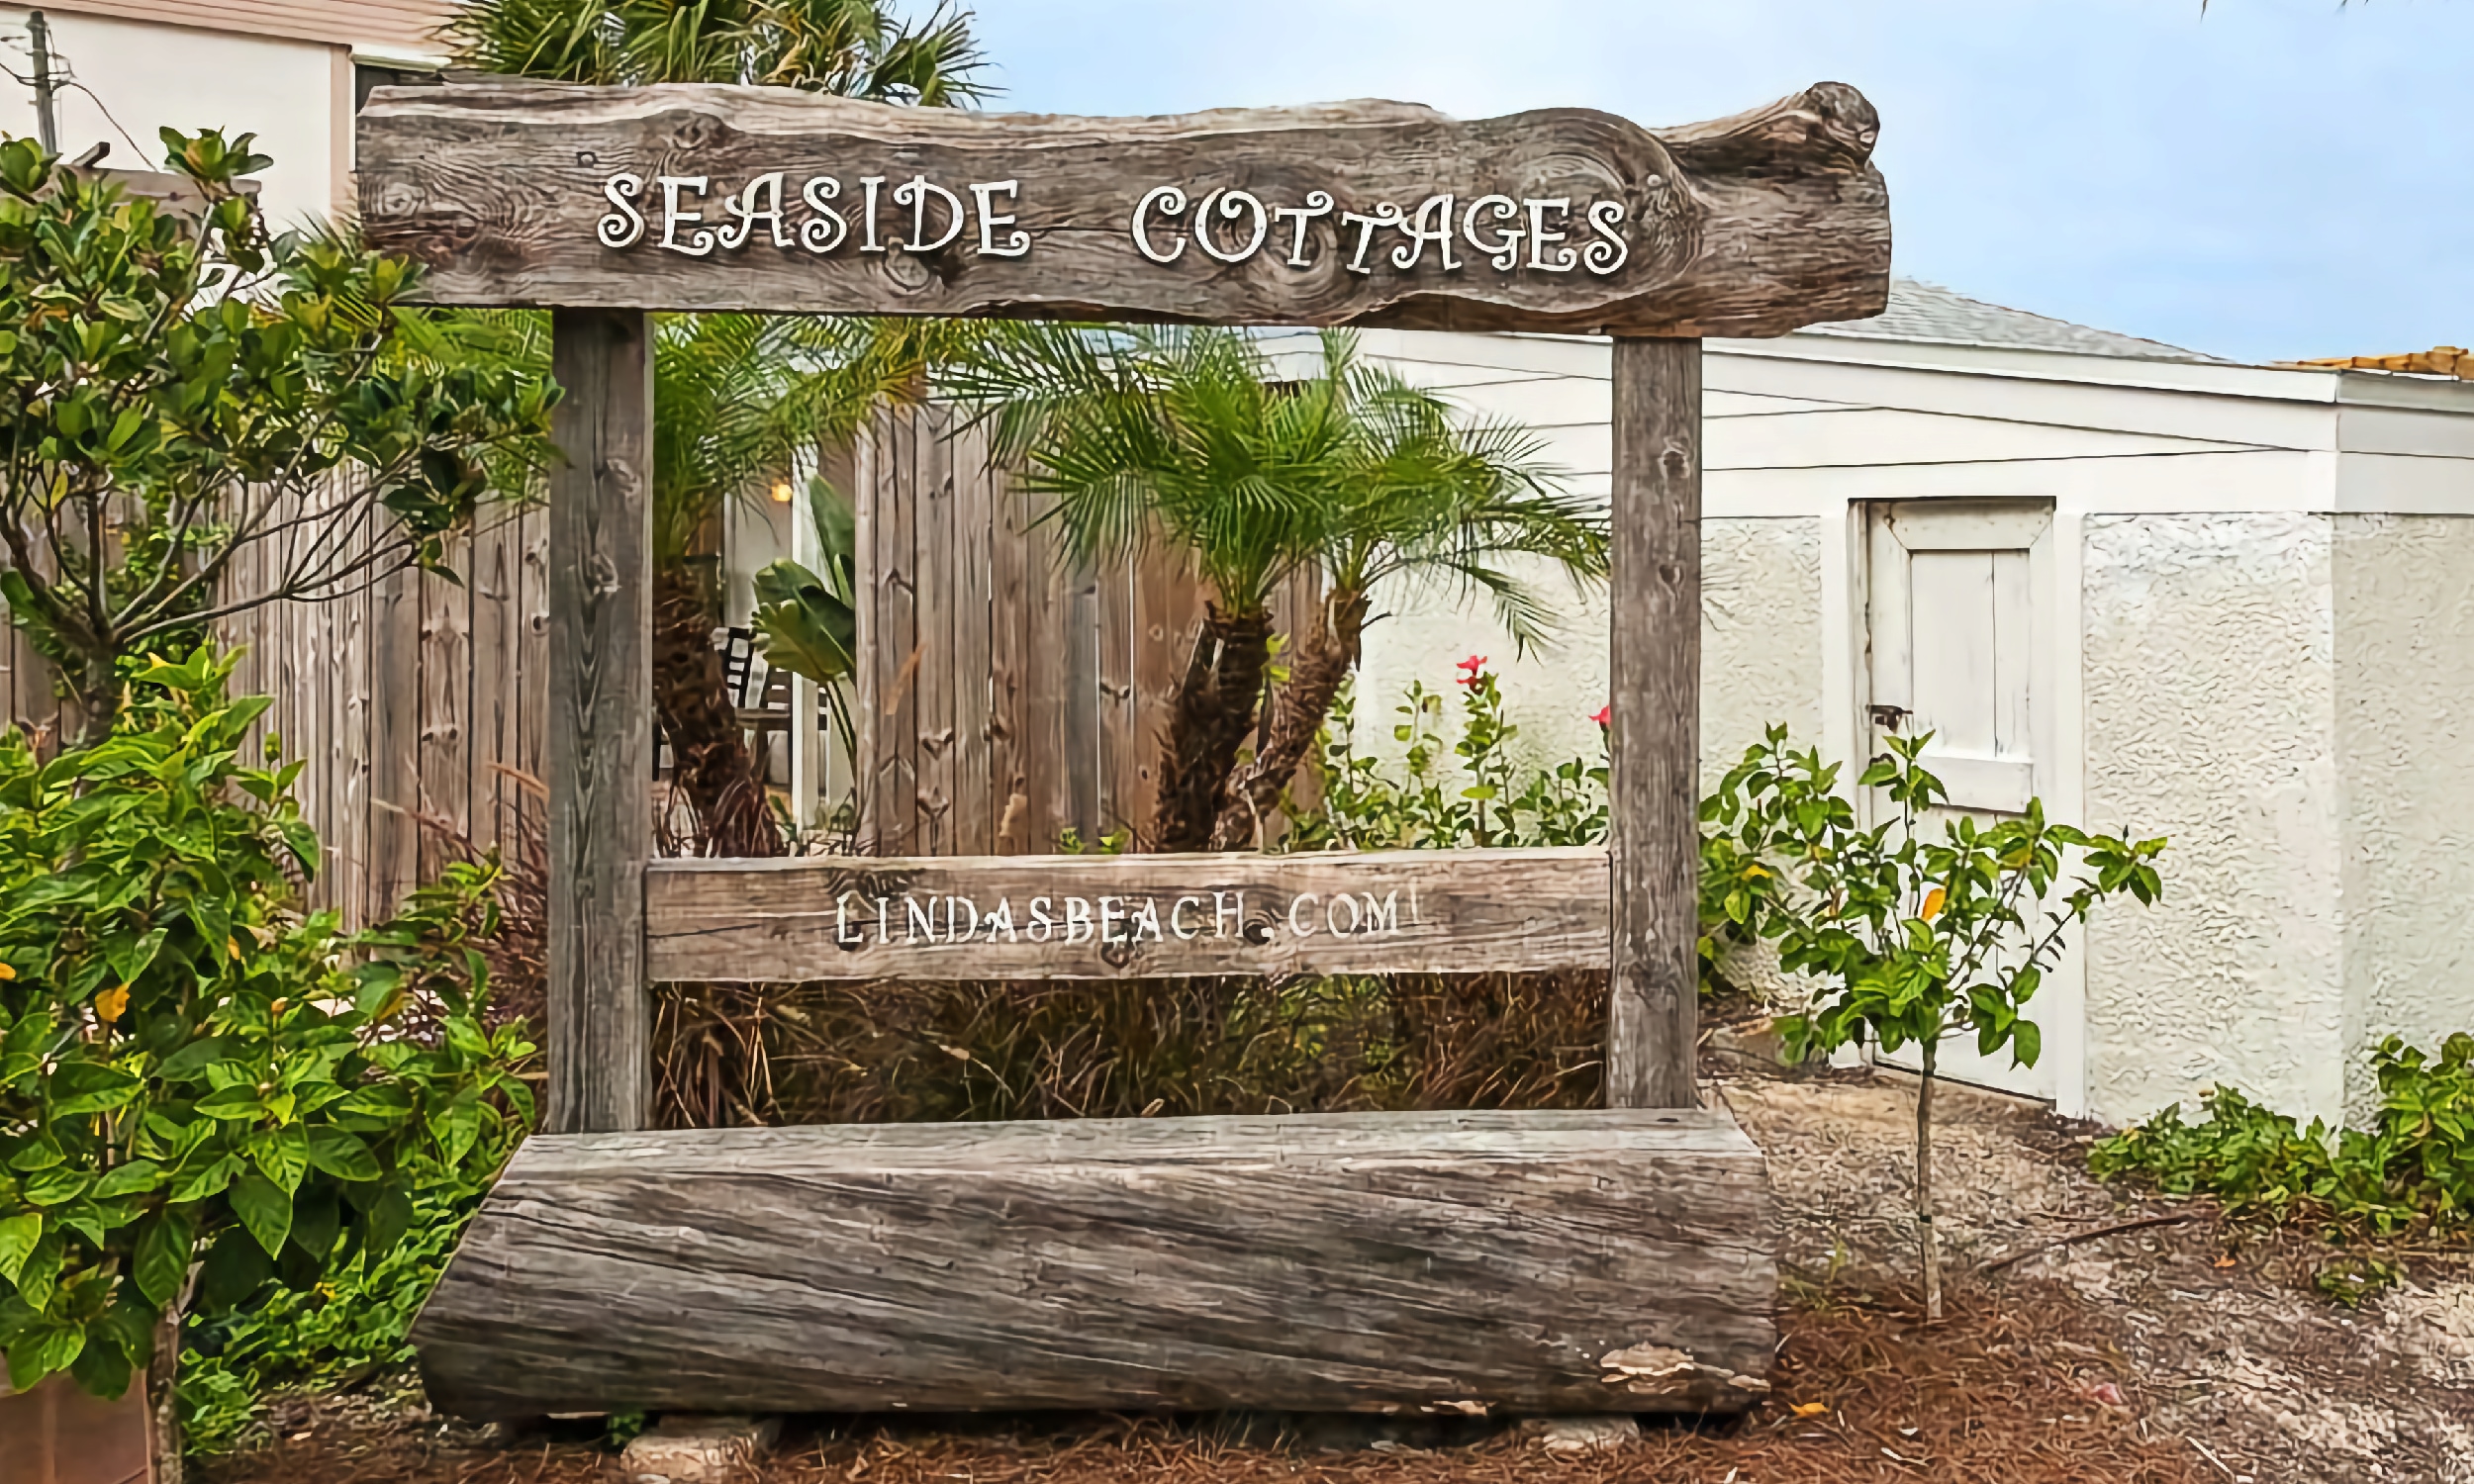 A large rustic wood sign welcomes guests to Linda's Beach Vacation Rentals on the beach